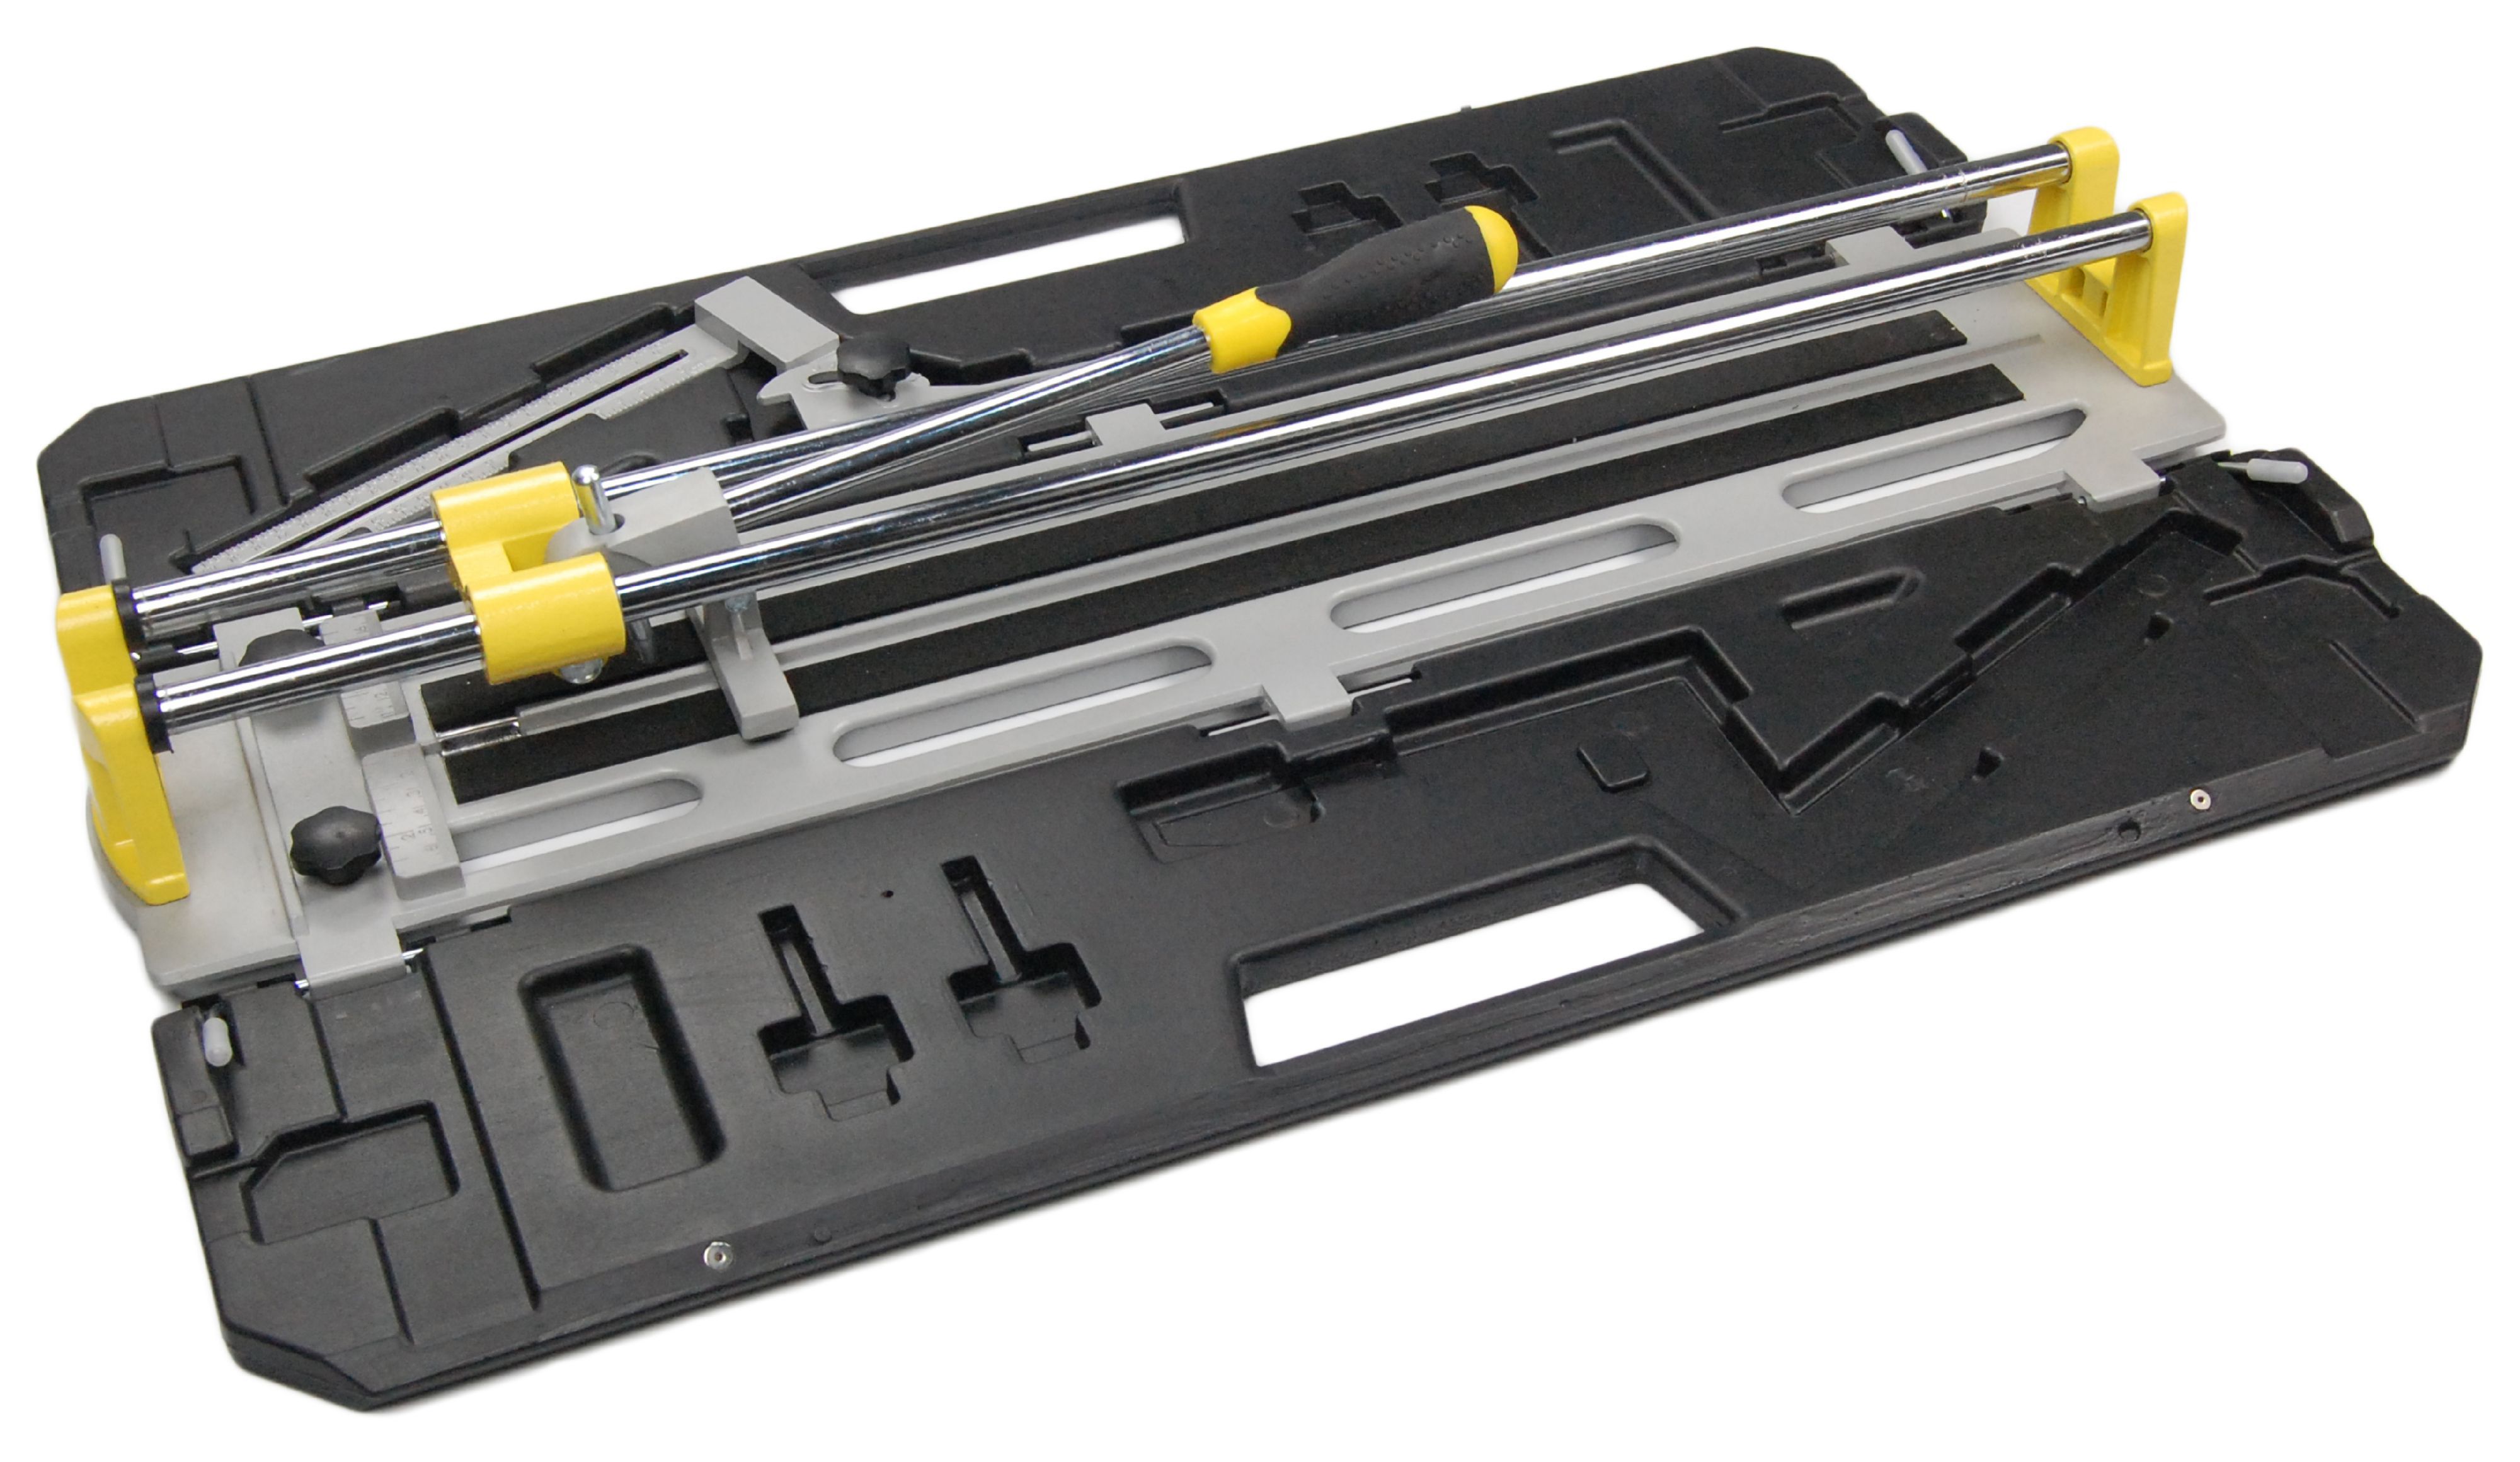 Product Weight 6.5kg Product Length 780mm Plasplugs Powerglide Pro Folding Tile Cutter Product Width 200mm